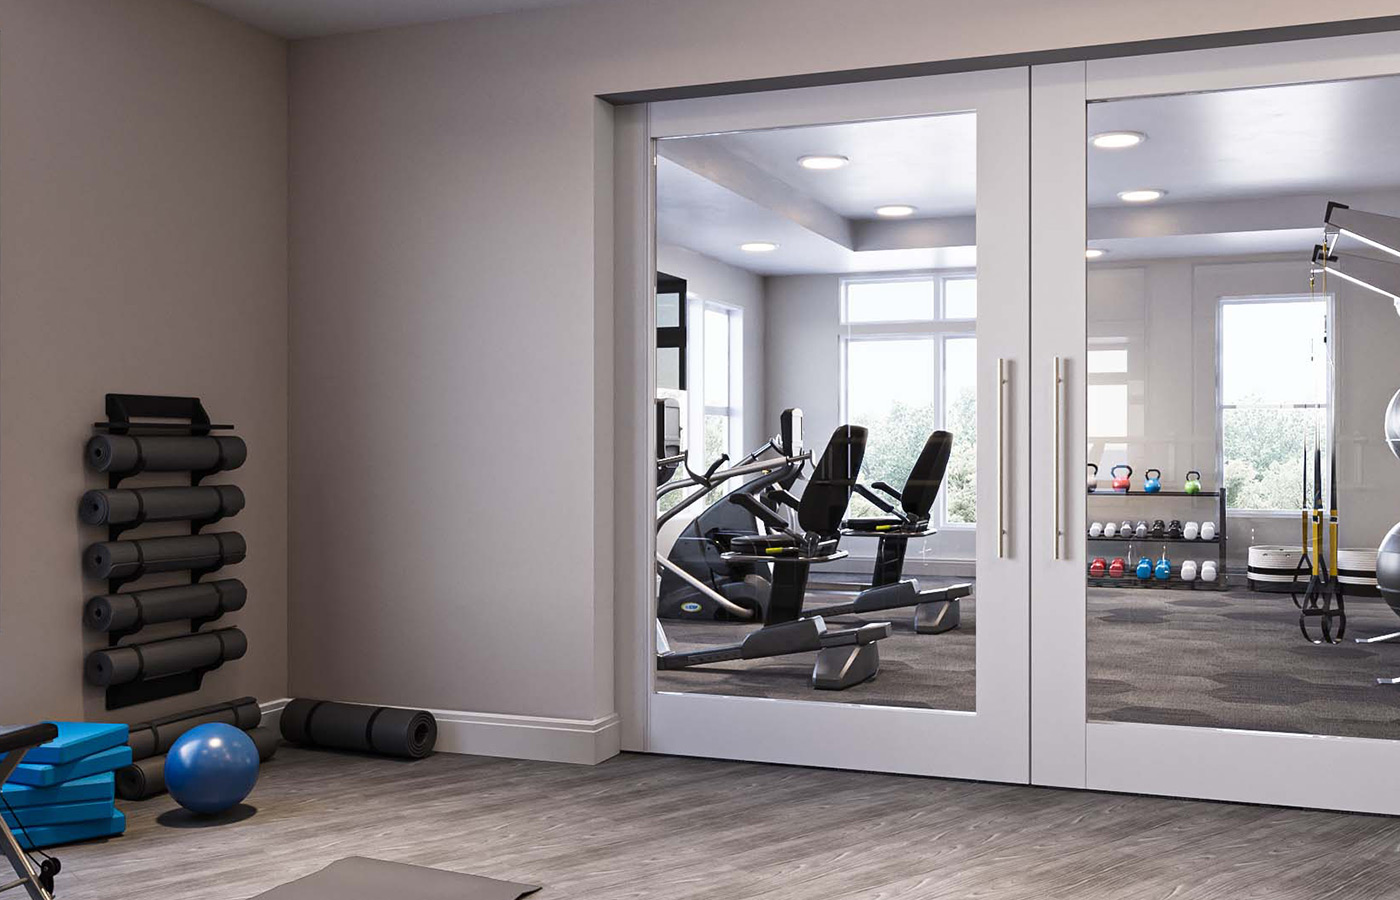 A fitness center with two rooms and exercise equipment.